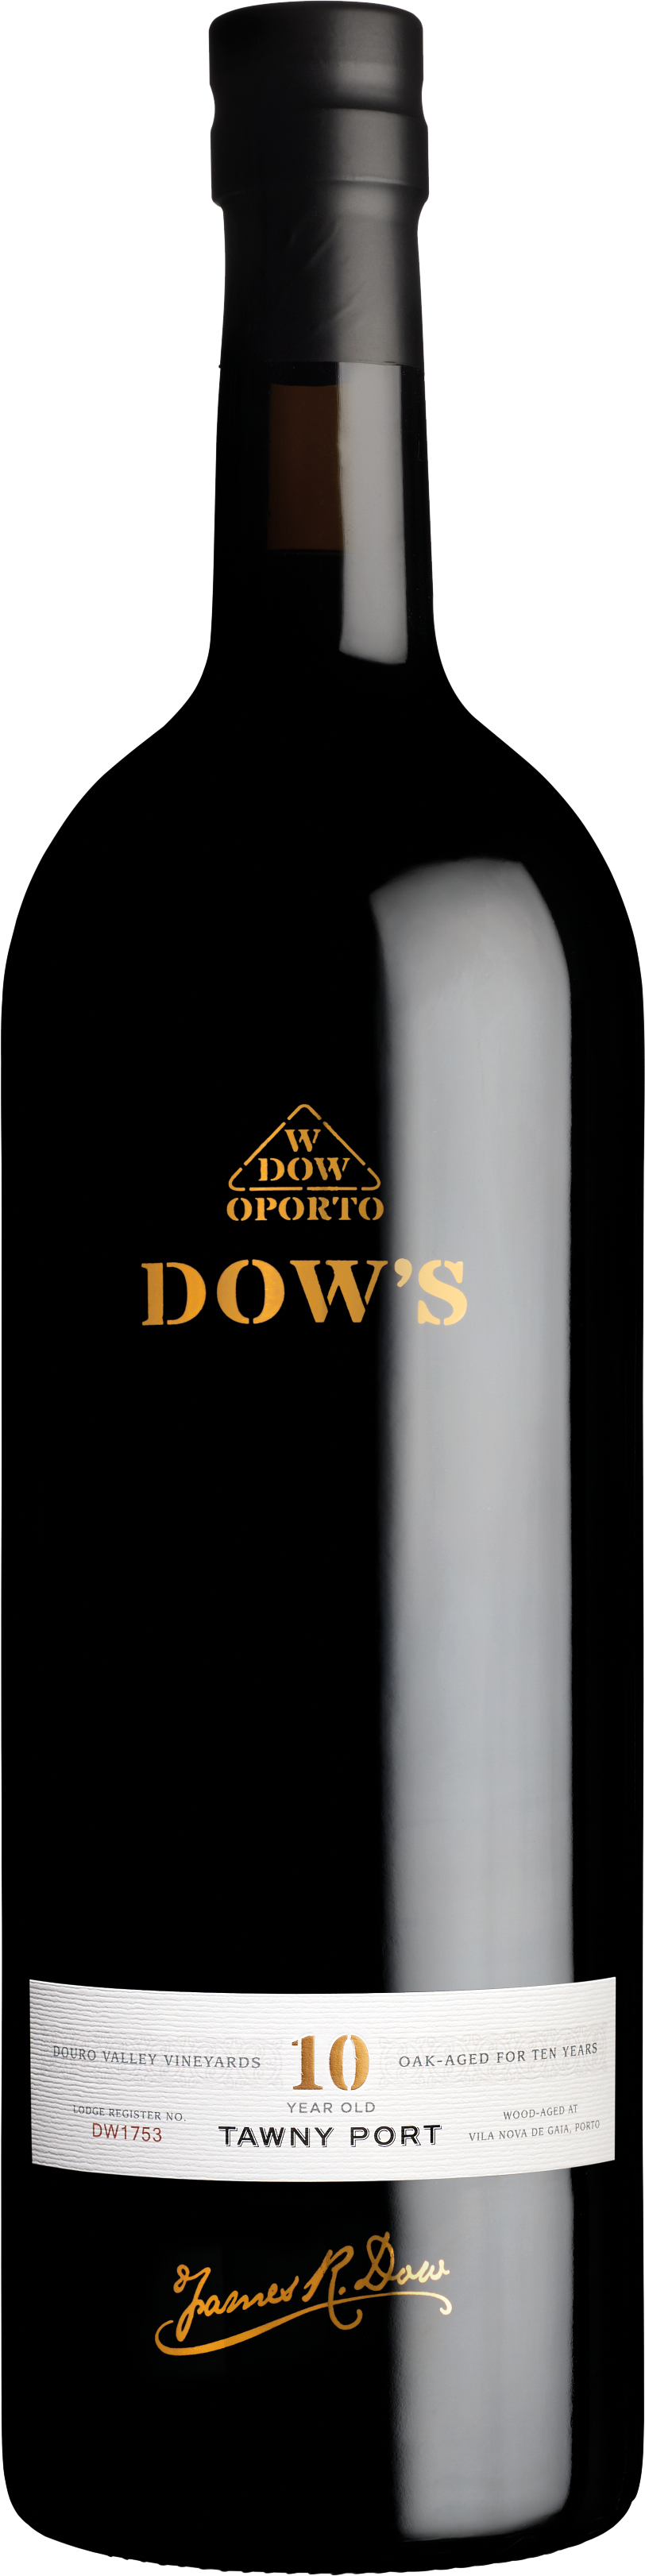 Product Image for DOW'S 10 YEAR OLD TAWNY PORT - DOUBLE MAGNUM (3L)